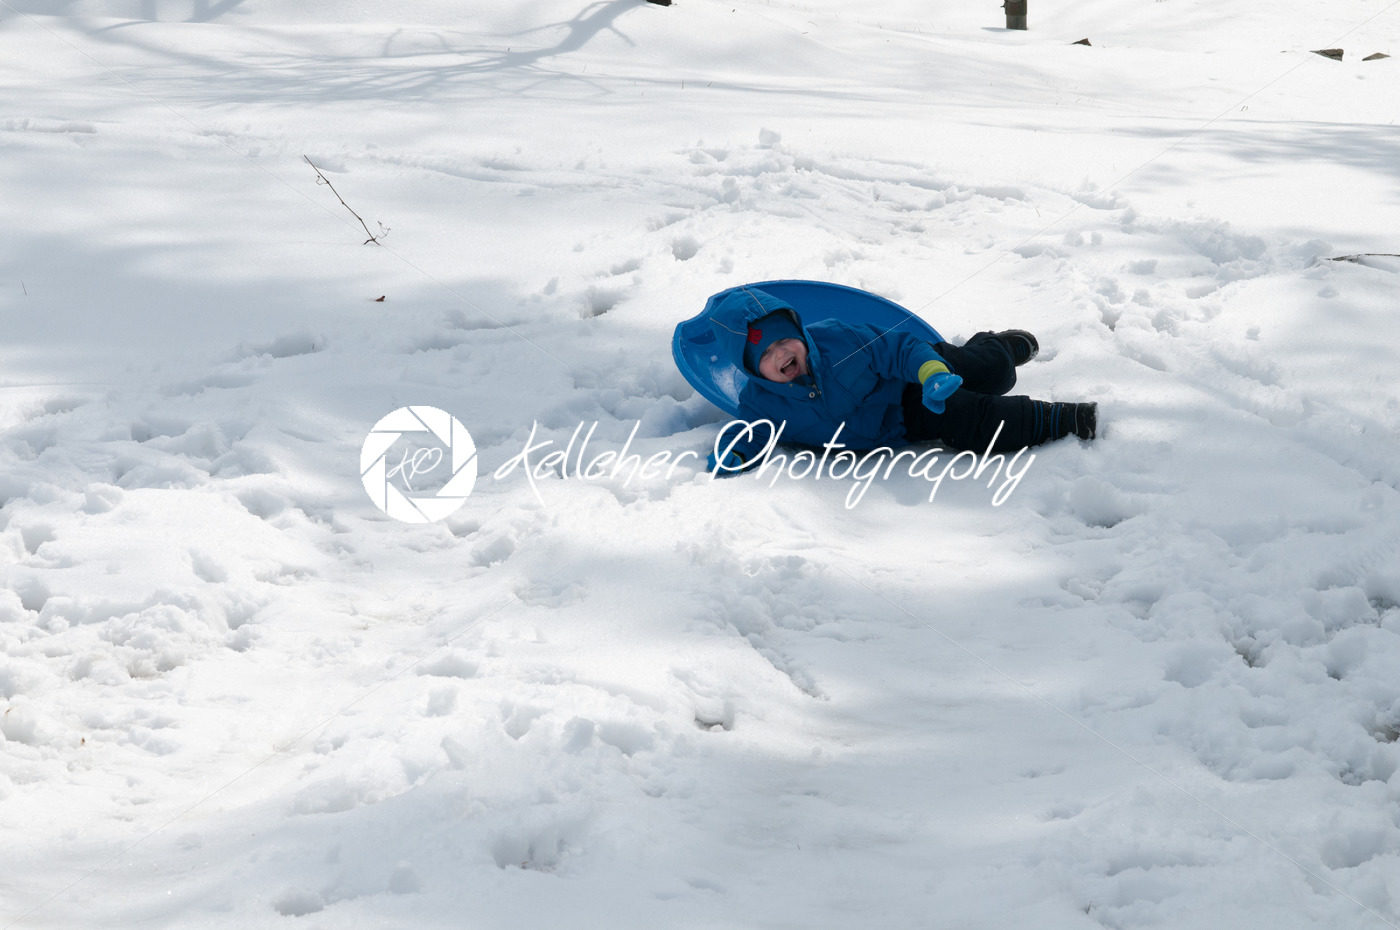 Young little boy enjoying sledding outside on a snow day - Kelleher Photography Store